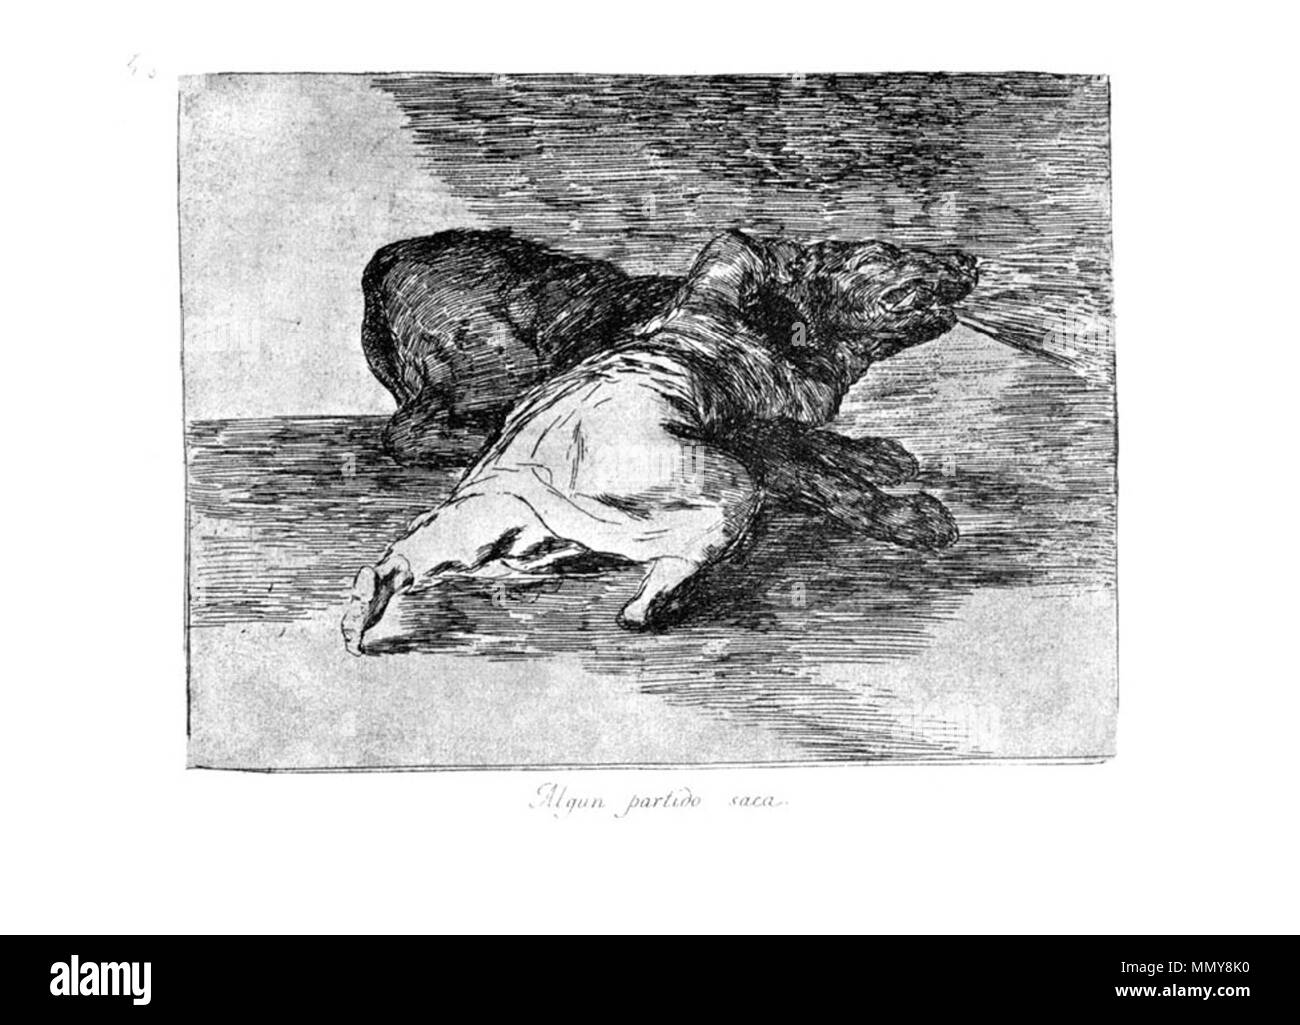 . Los Desatres de la Guerra is a set of 80 aquatint prints created by Francisco Goya in the 1810s. Plate 40: Algun partido saca. (There is something to be gained. )  . 1810s.   Francisco Goya  (1746–1828)      Alternative names Francisco Goya Lucientes, Francisco de Goya y Lucientes, Francisco José Goya Lucientes  Description Spanish painter, printmaker, lithographer, engraver and etcher  Date of birth/death 30 March 1746 16 April 1828  Location of birth/death Fuendetodos Bordeaux  Work location Madrid, Zaragoza, Bordeaux  Authority control  : Q5432 VIAF:?54343141 ISNI:?0000 0001 2280 1608 ULA Stock Photo